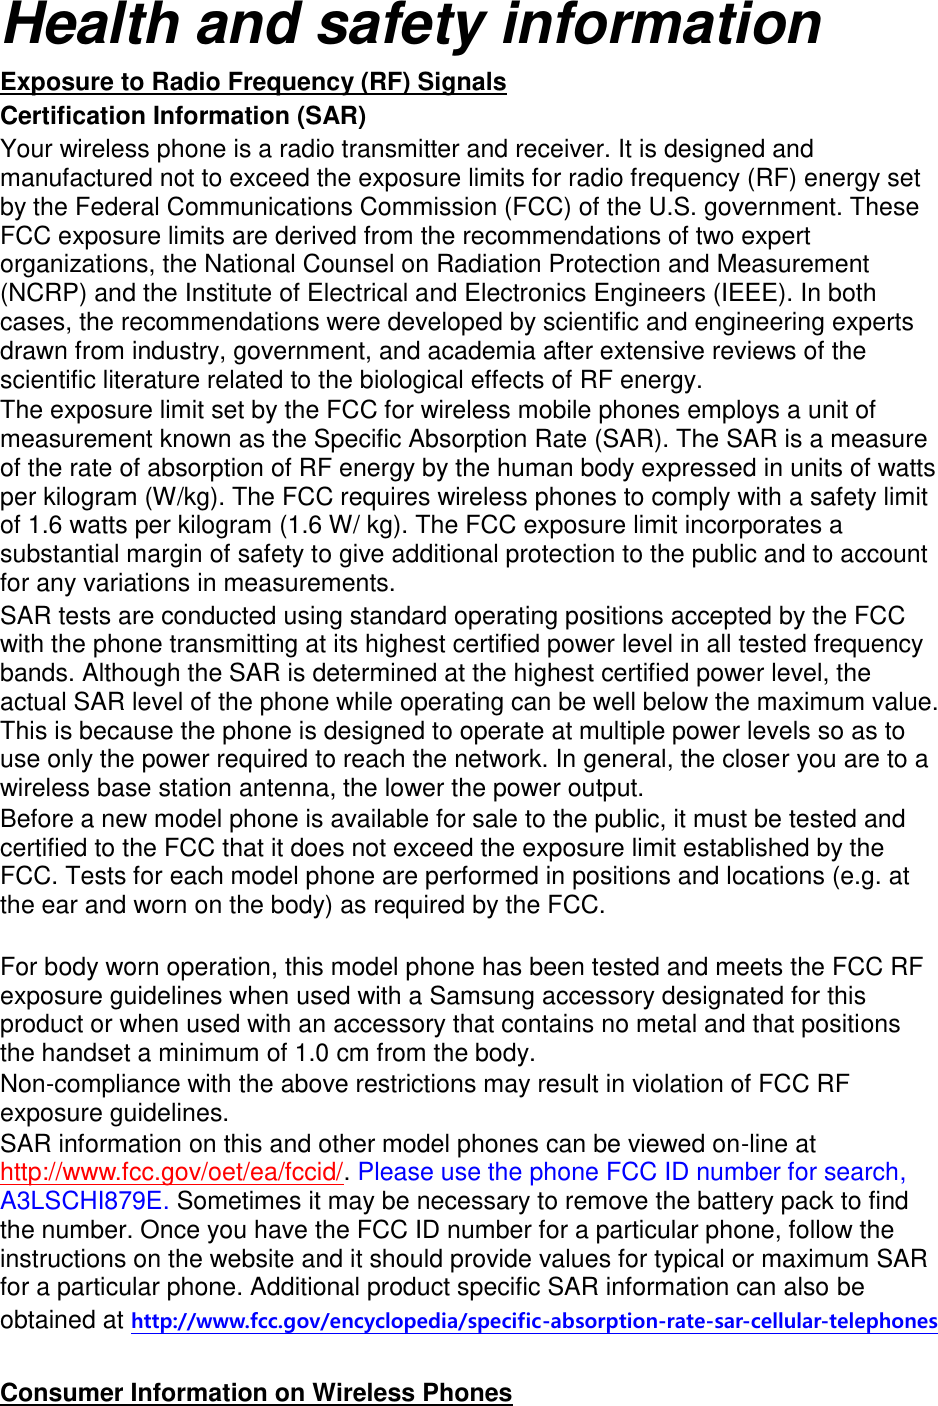 Health and safety information Exposure to Radio Frequency (RF) Signals Certification Information (SAR) Your wireless phone is a radio transmitter and receiver. It is designed and manufactured not to exceed the exposure limits for radio frequency (RF) energy set by the Federal Communications Commission (FCC) of the U.S. government. These FCC exposure limits are derived from the recommendations of two expert organizations, the National Counsel on Radiation Protection and Measurement (NCRP) and the Institute of Electrical and Electronics Engineers (IEEE). In both cases, the recommendations were developed by scientific and engineering experts drawn from industry, government, and academia after extensive reviews of the scientific literature related to the biological effects of RF energy. The exposure limit set by the FCC for wireless mobile phones employs a unit of measurement known as the Specific Absorption Rate (SAR). The SAR is a measure of the rate of absorption of RF energy by the human body expressed in units of watts per kilogram (W/kg). The FCC requires wireless phones to comply with a safety limit of 1.6 watts per kilogram (1.6 W/ kg). The FCC exposure limit incorporates a substantial margin of safety to give additional protection to the public and to account for any variations in measurements. SAR tests are conducted using standard operating positions accepted by the FCC with the phone transmitting at its highest certified power level in all tested frequency bands. Although the SAR is determined at the highest certified power level, the actual SAR level of the phone while operating can be well below the maximum value. This is because the phone is designed to operate at multiple power levels so as to use only the power required to reach the network. In general, the closer you are to a wireless base station antenna, the lower the power output. Before a new model phone is available for sale to the public, it must be tested and certified to the FCC that it does not exceed the exposure limit established by the FCC. Tests for each model phone are performed in positions and locations (e.g. at the ear and worn on the body) as required by the FCC.      For body worn operation, this model phone has been tested and meets the FCC RF exposure guidelines when used with a Samsung accessory designated for this product or when used with an accessory that contains no metal and that positions the handset a minimum of 1.0 cm from the body.   Non-compliance with the above restrictions may result in violation of FCC RF exposure guidelines. SAR information on this and other model phones can be viewed on-line at http://www.fcc.gov/oet/ea/fccid/. Please use the phone FCC ID number for search, A3LSCHI879E. Sometimes it may be necessary to remove the battery pack to find the number. Once you have the FCC ID number for a particular phone, follow the instructions on the website and it should provide values for typical or maximum SAR for a particular phone. Additional product specific SAR information can also be obtained at http://www.fcc.gov/encyclopedia/specific-absorption-rate-sar-cellular-telephones  Consumer Information on Wireless Phones 